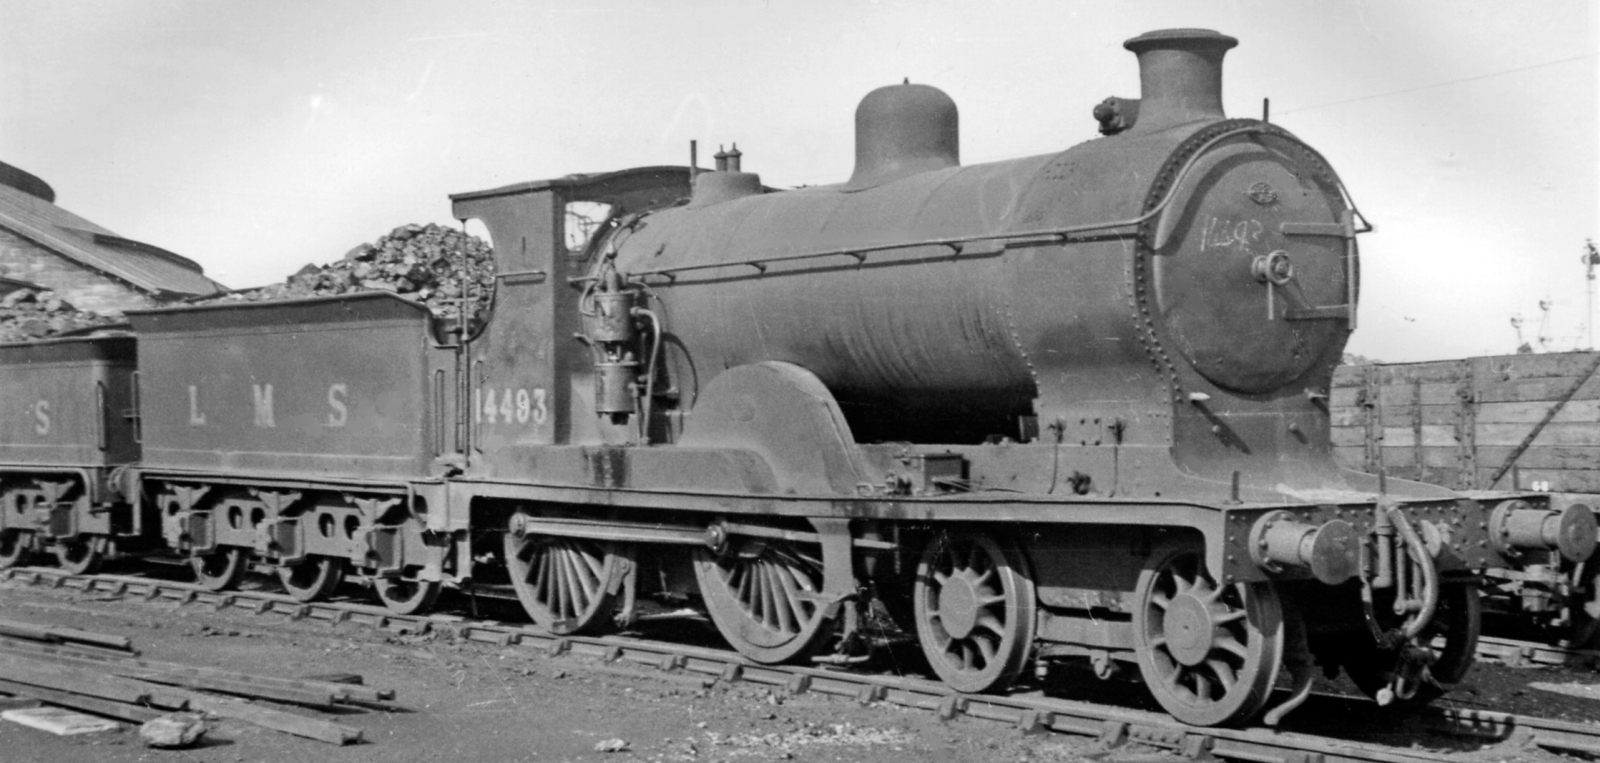 No. 14493 of the LMS in August 1948 at Inverness